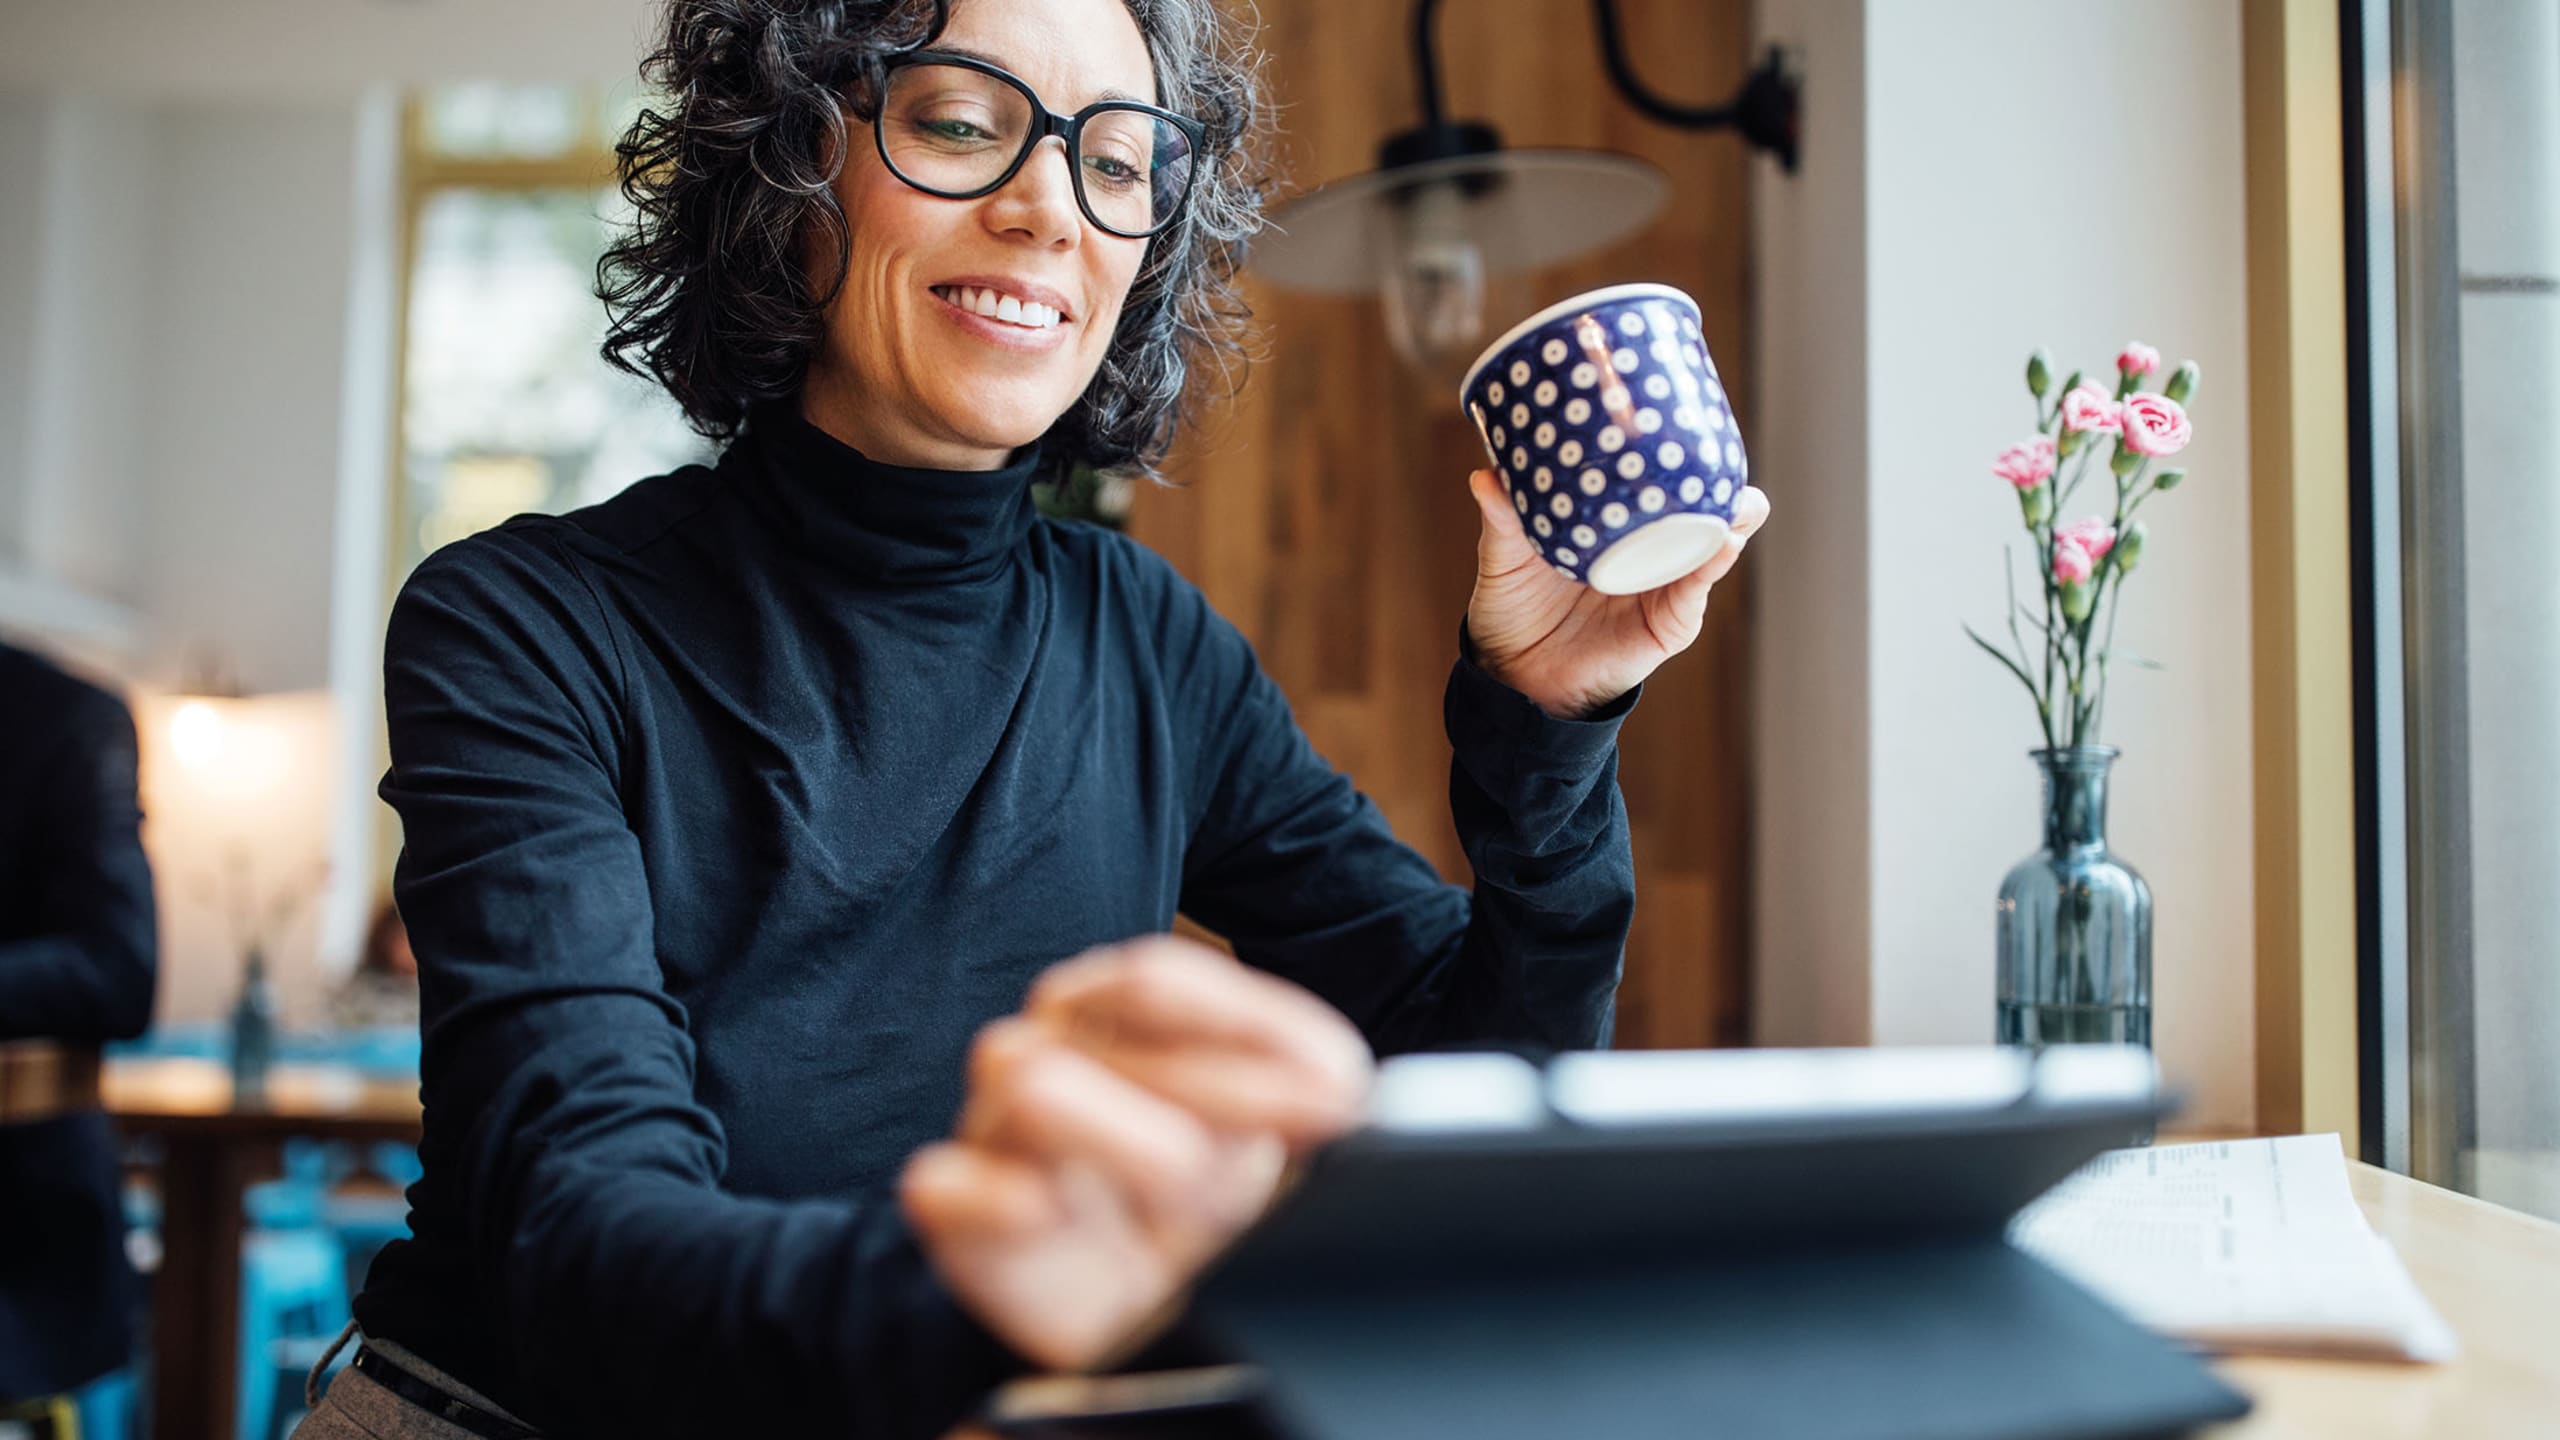 Woman wearing black roll neck smiling at tablet whilst drinking a coffee from a navy and white spotted mug